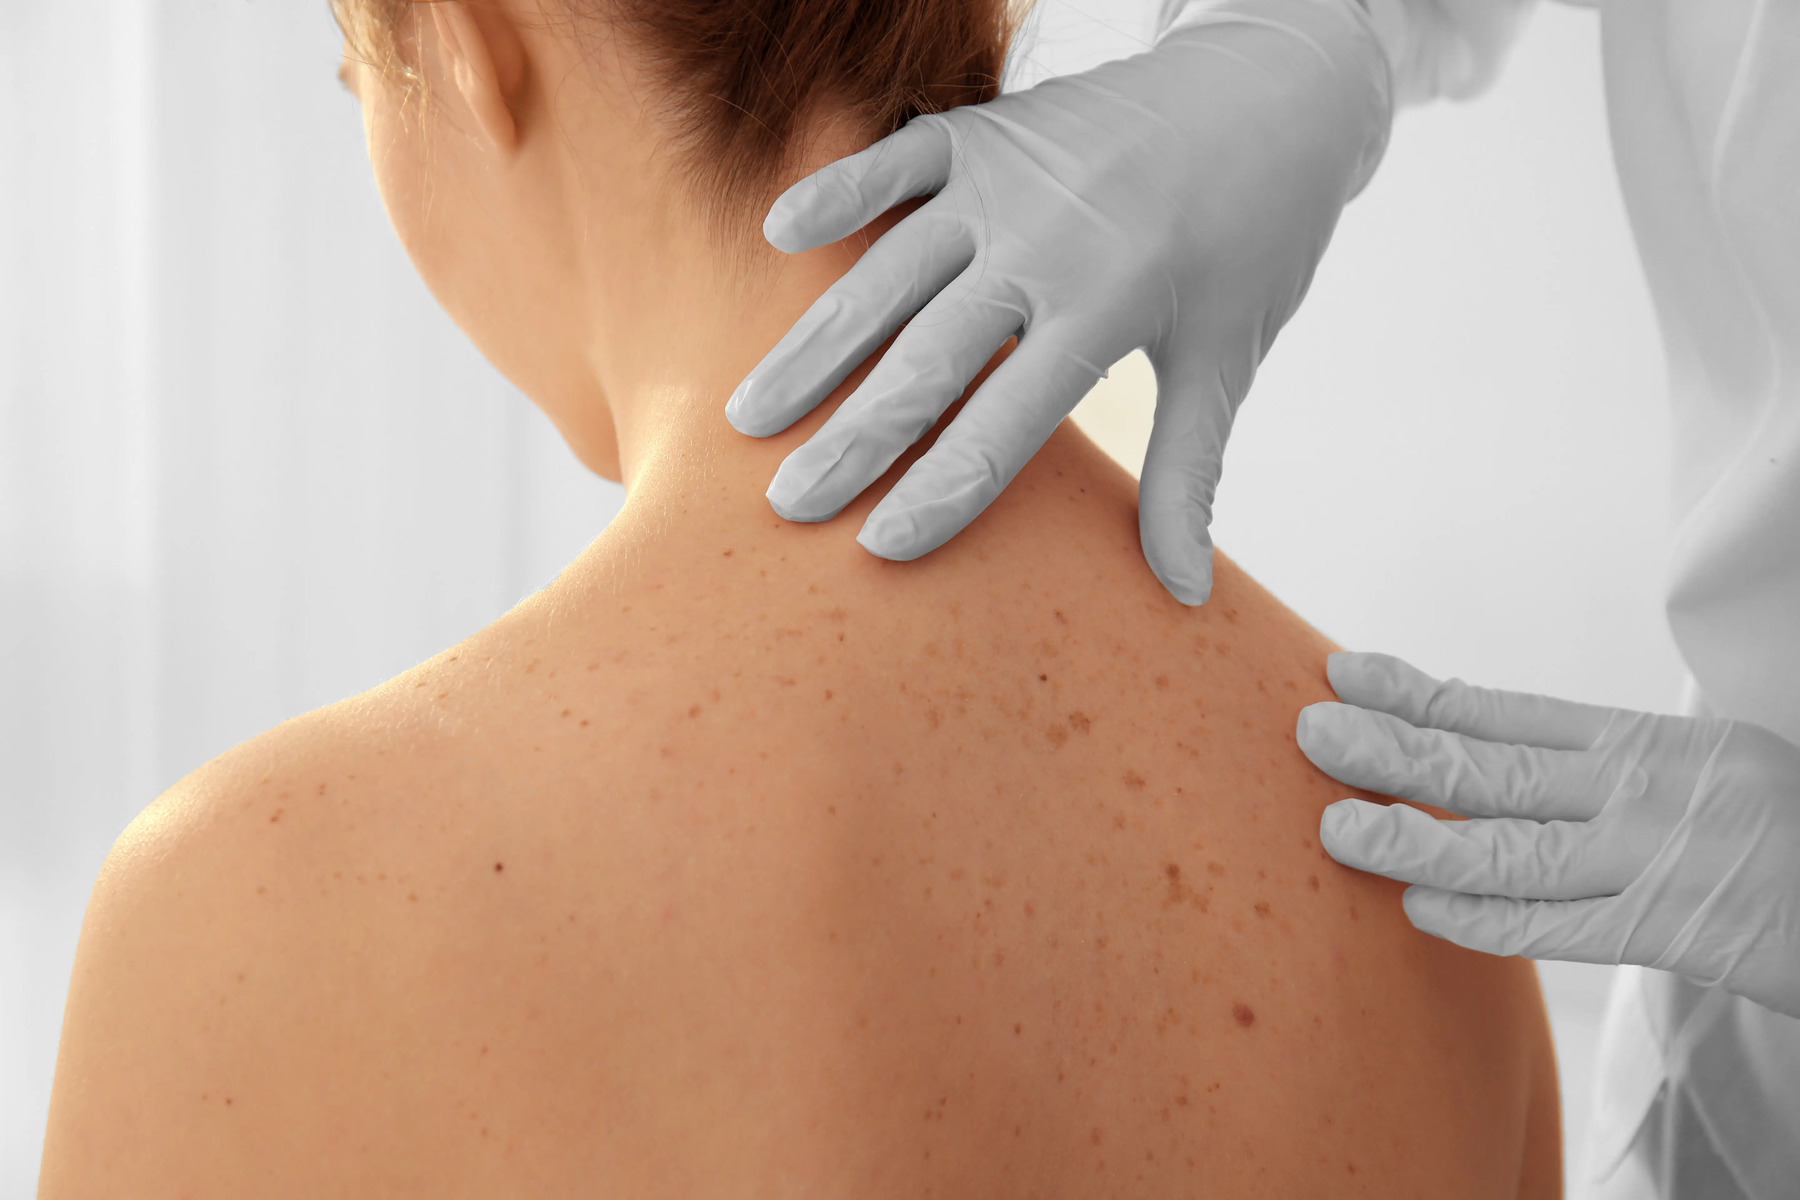 11 Facts About Skin Cancer Awareness Month May 